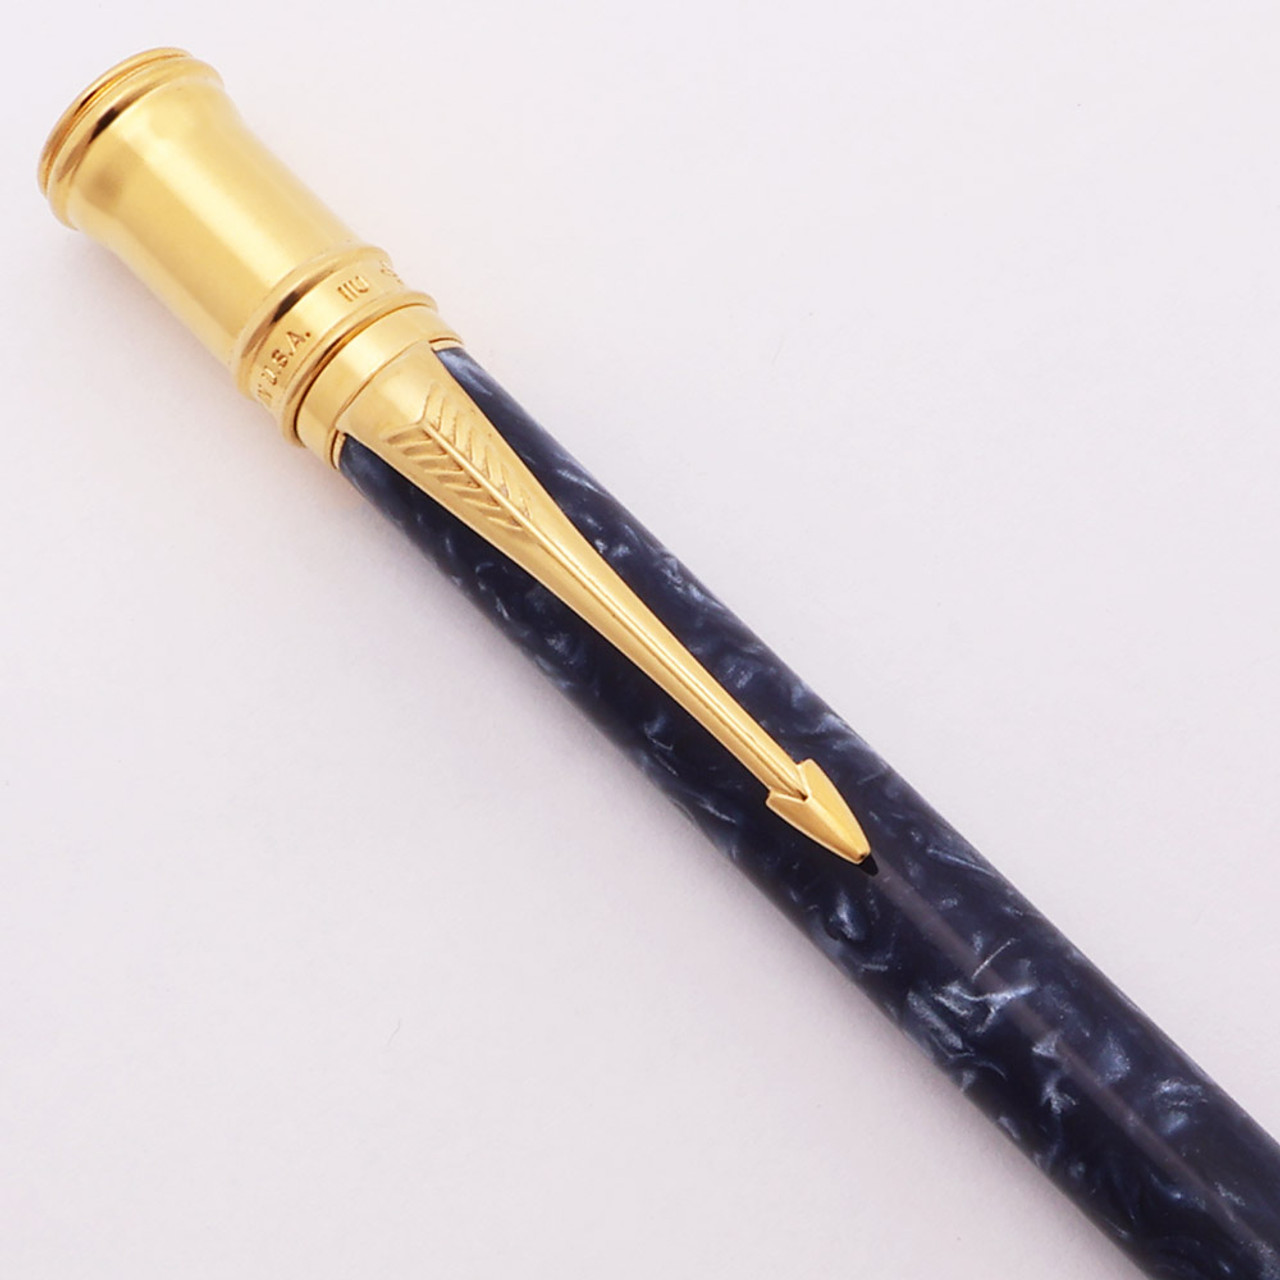 Parker Modern Duofold Ballpoint (1991) - Mark I, Blue Marble (Excellent, Works Well)